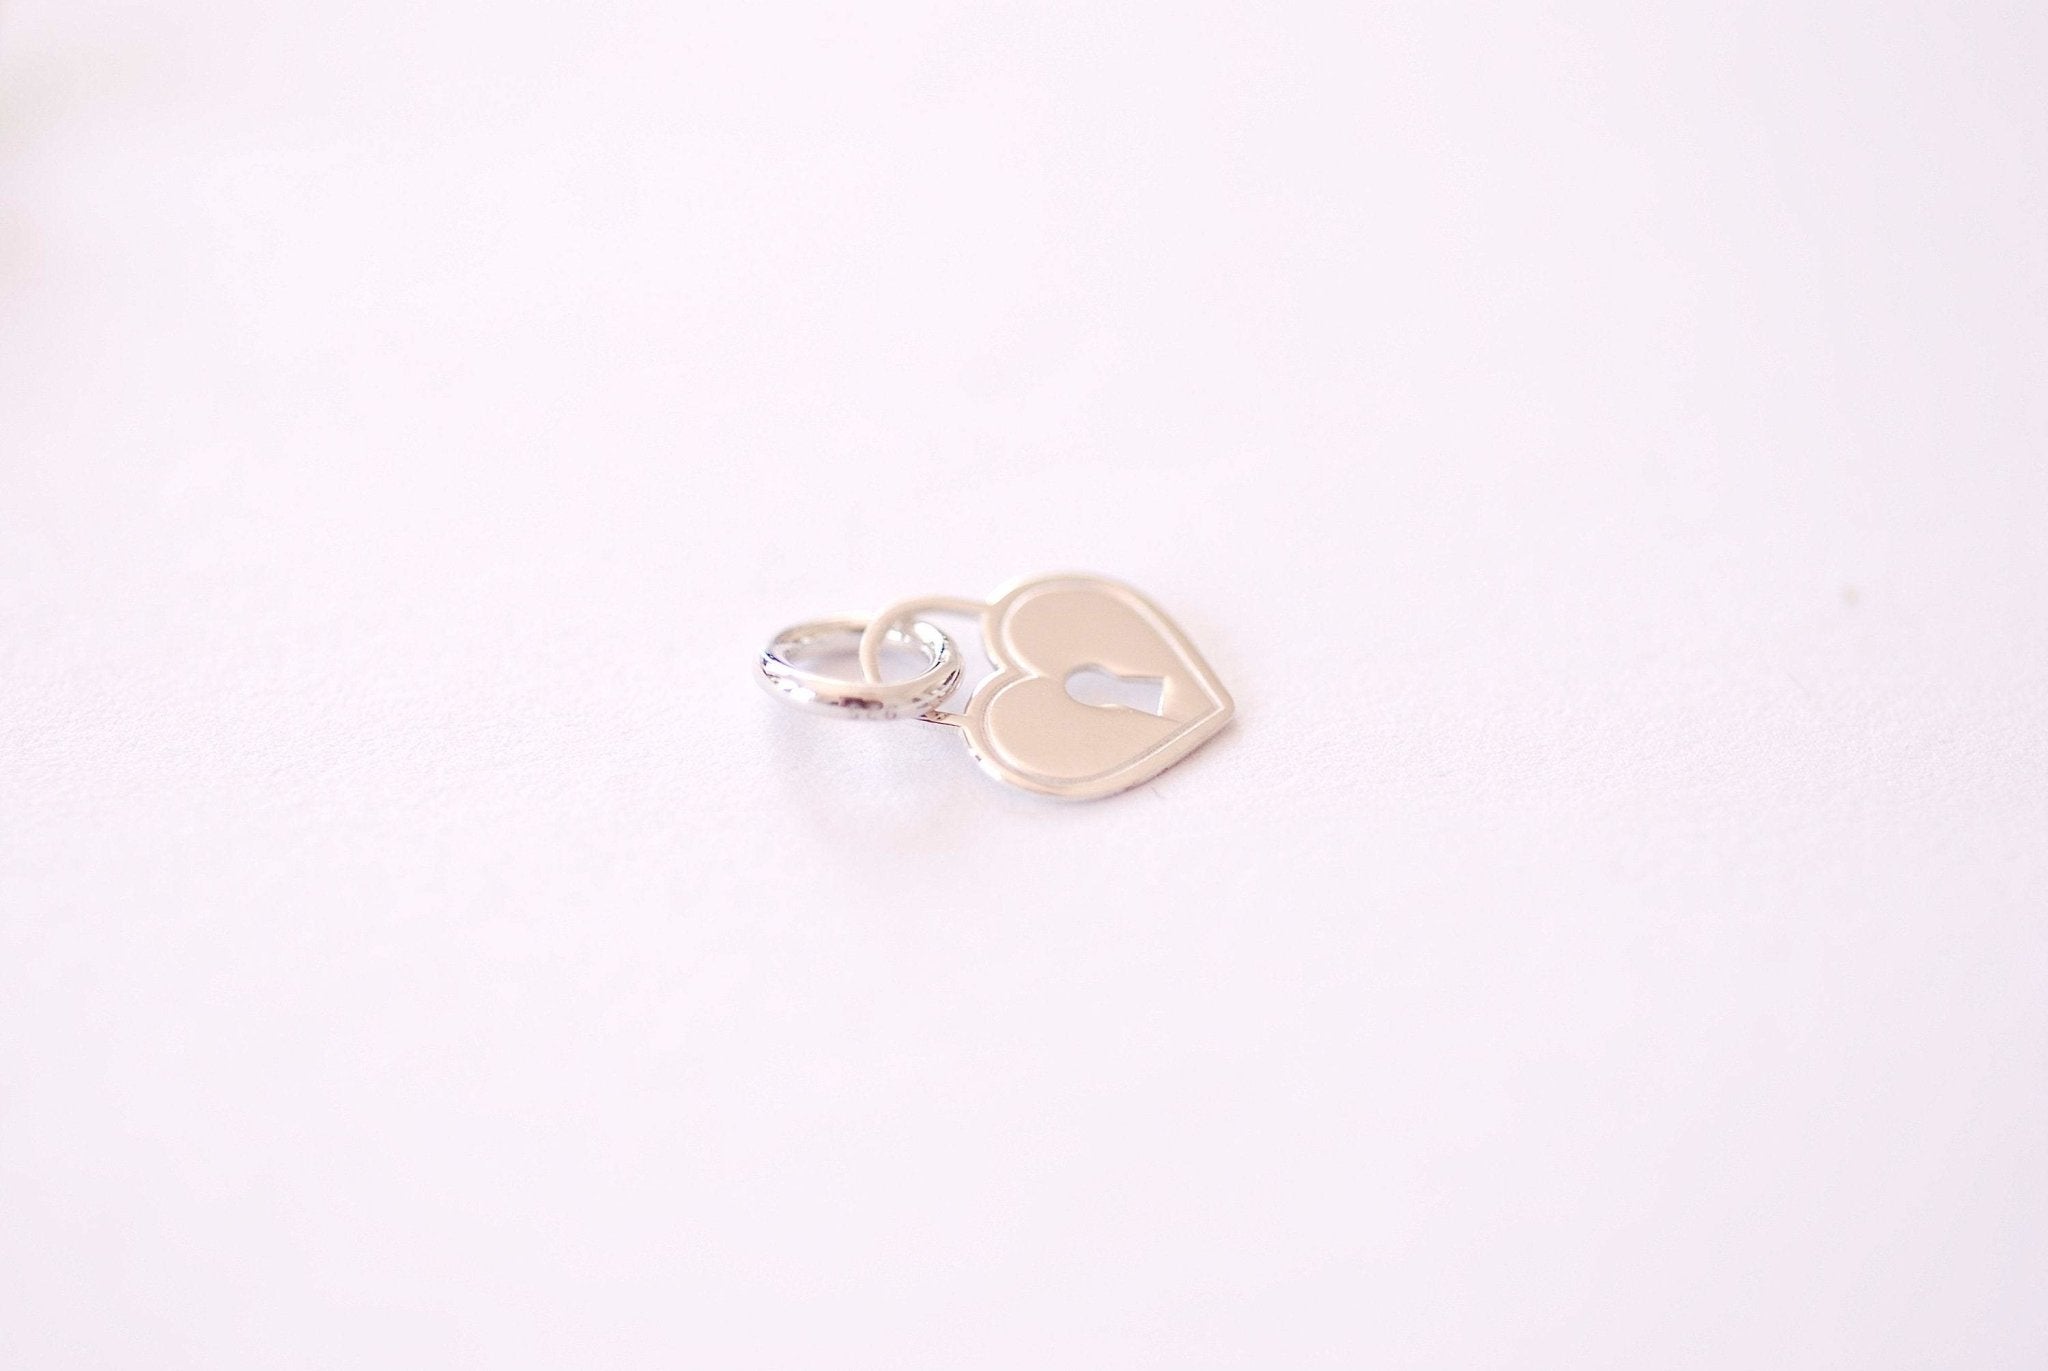 Small Vermeil Shiny Gold or 925 Sterling Silver Heart Padlock Shape Charm Pendant with attached jump ring love heart friendship charm - HarperCrown